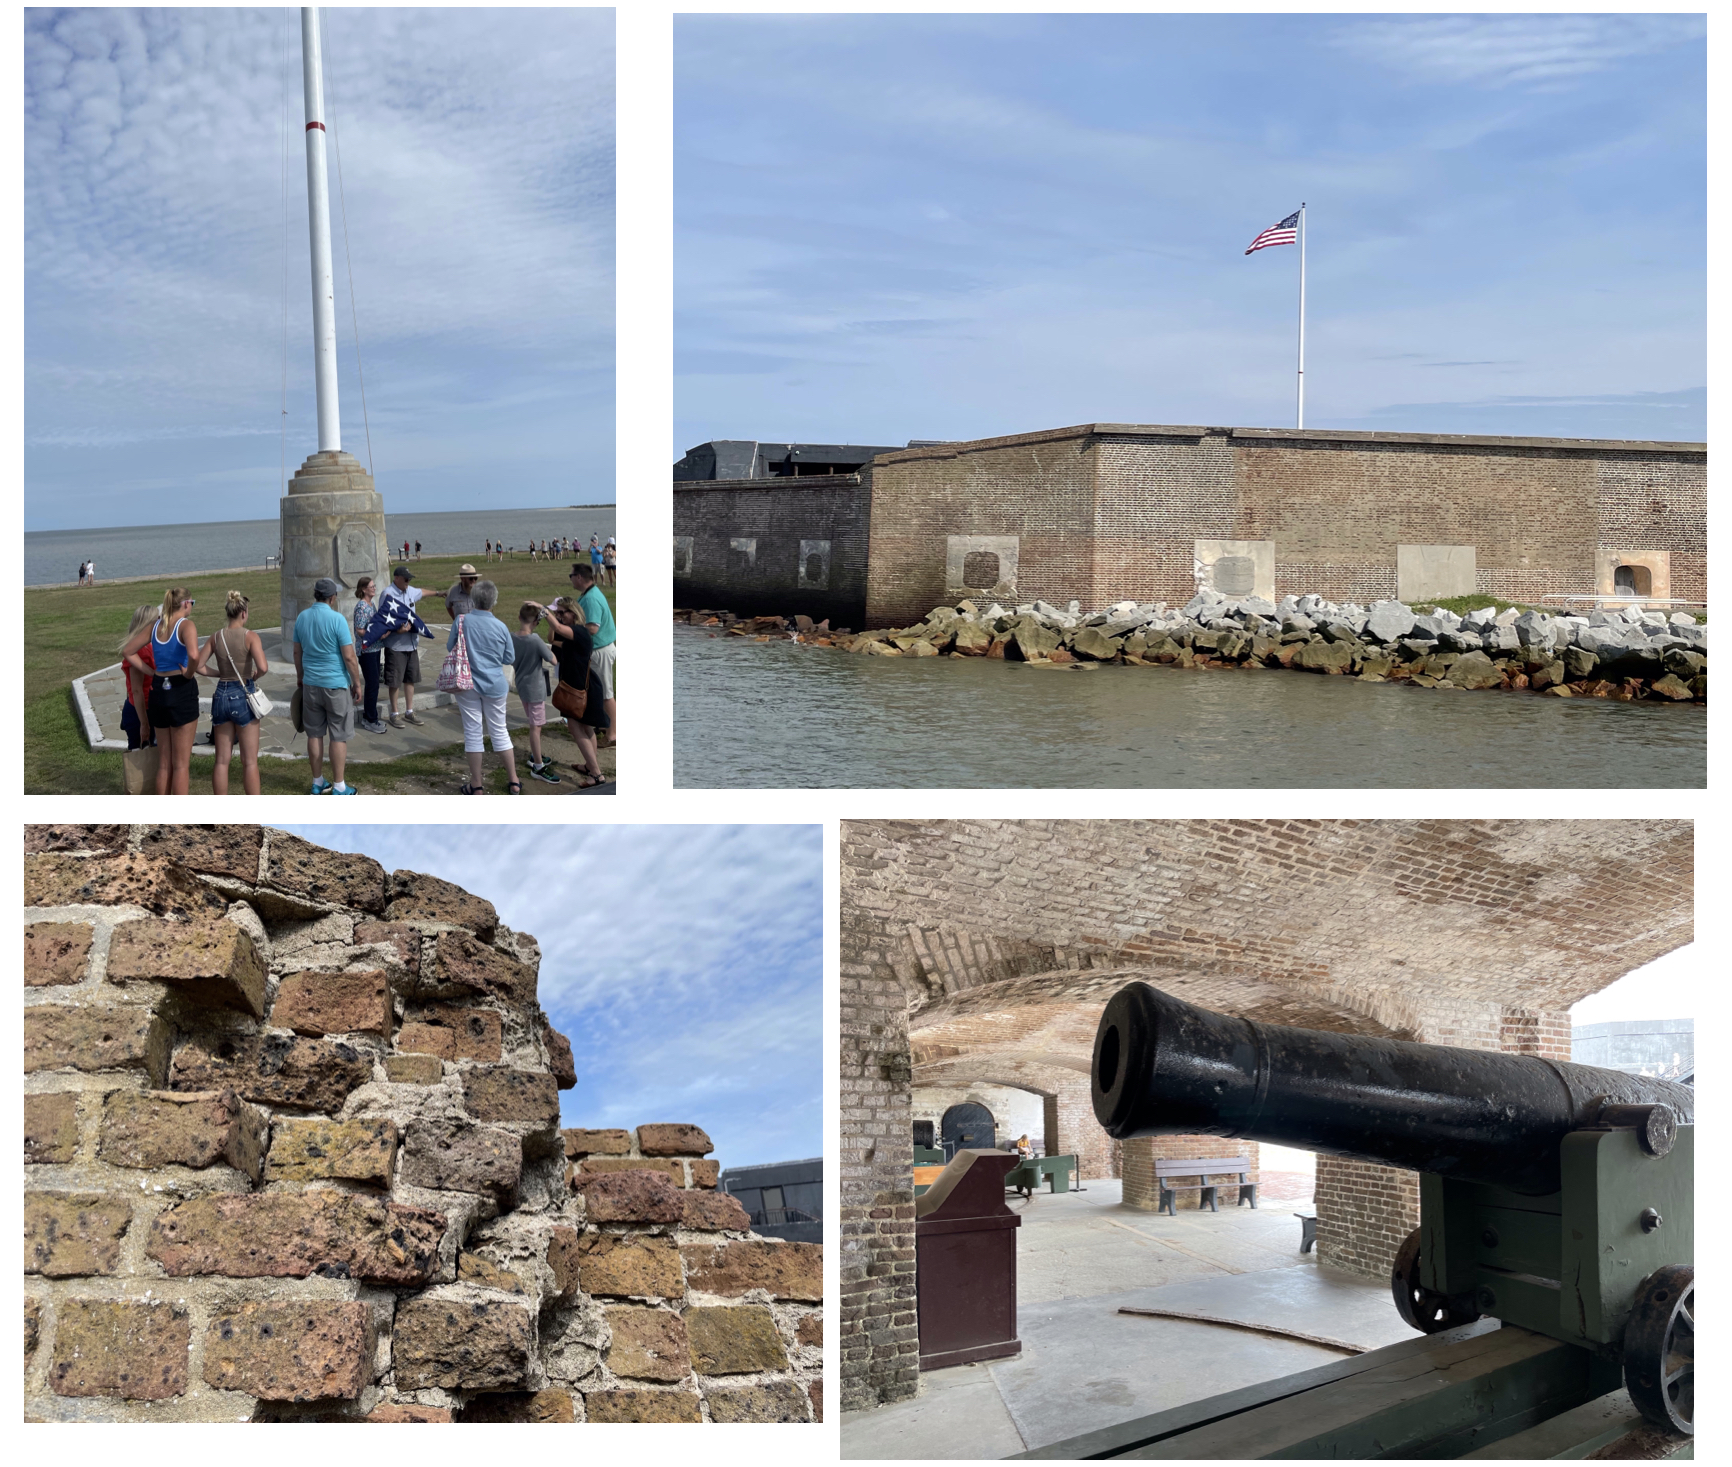 Photos from the trip to Fort Sumter.  Photos taken by and the property of FourWalls.